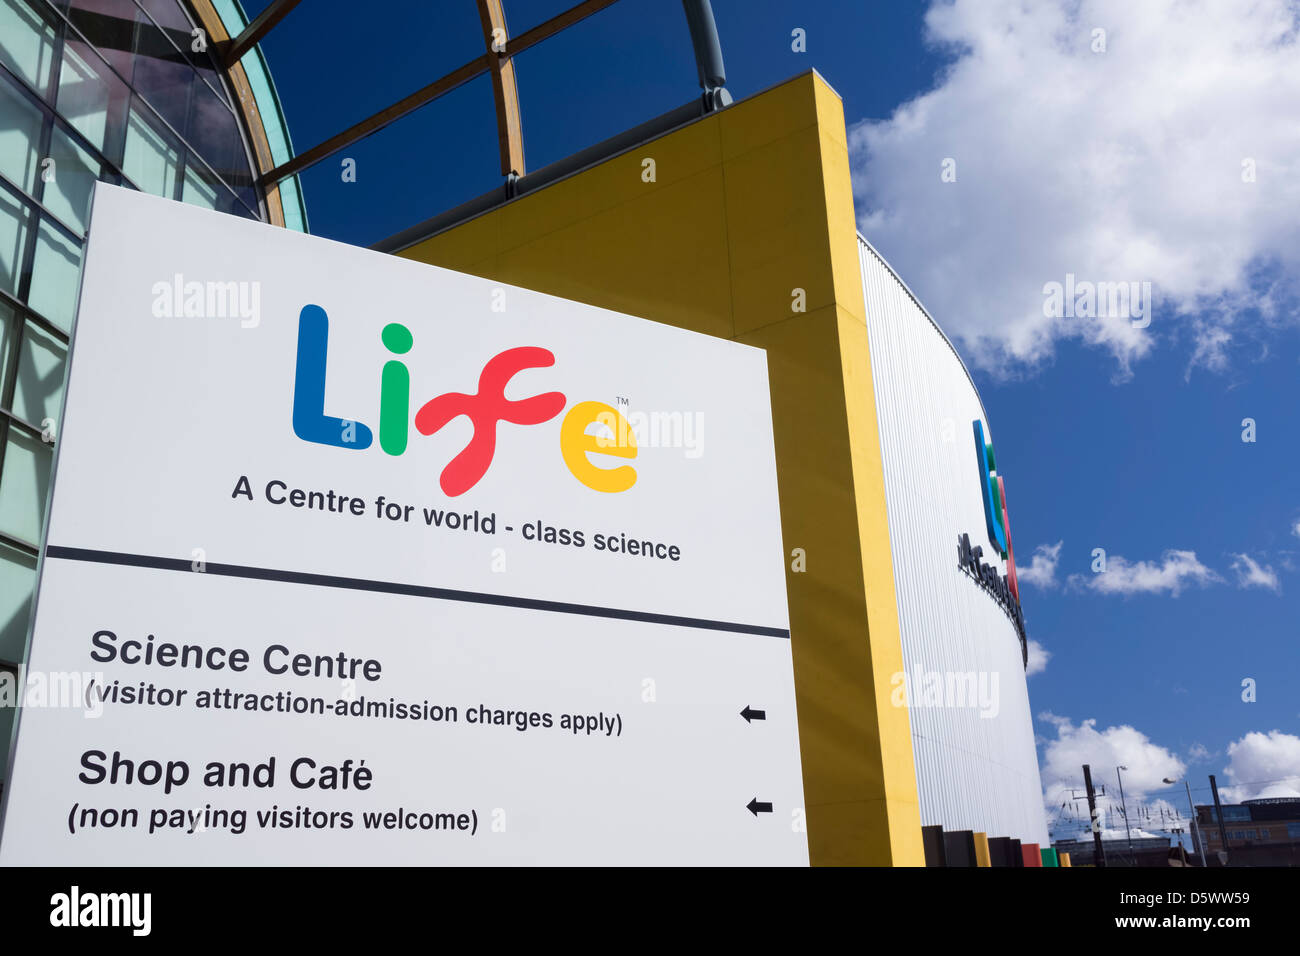 The Centre of Life, A Centre for world - class science  at Newcastle Upon Tyne Stock Photo